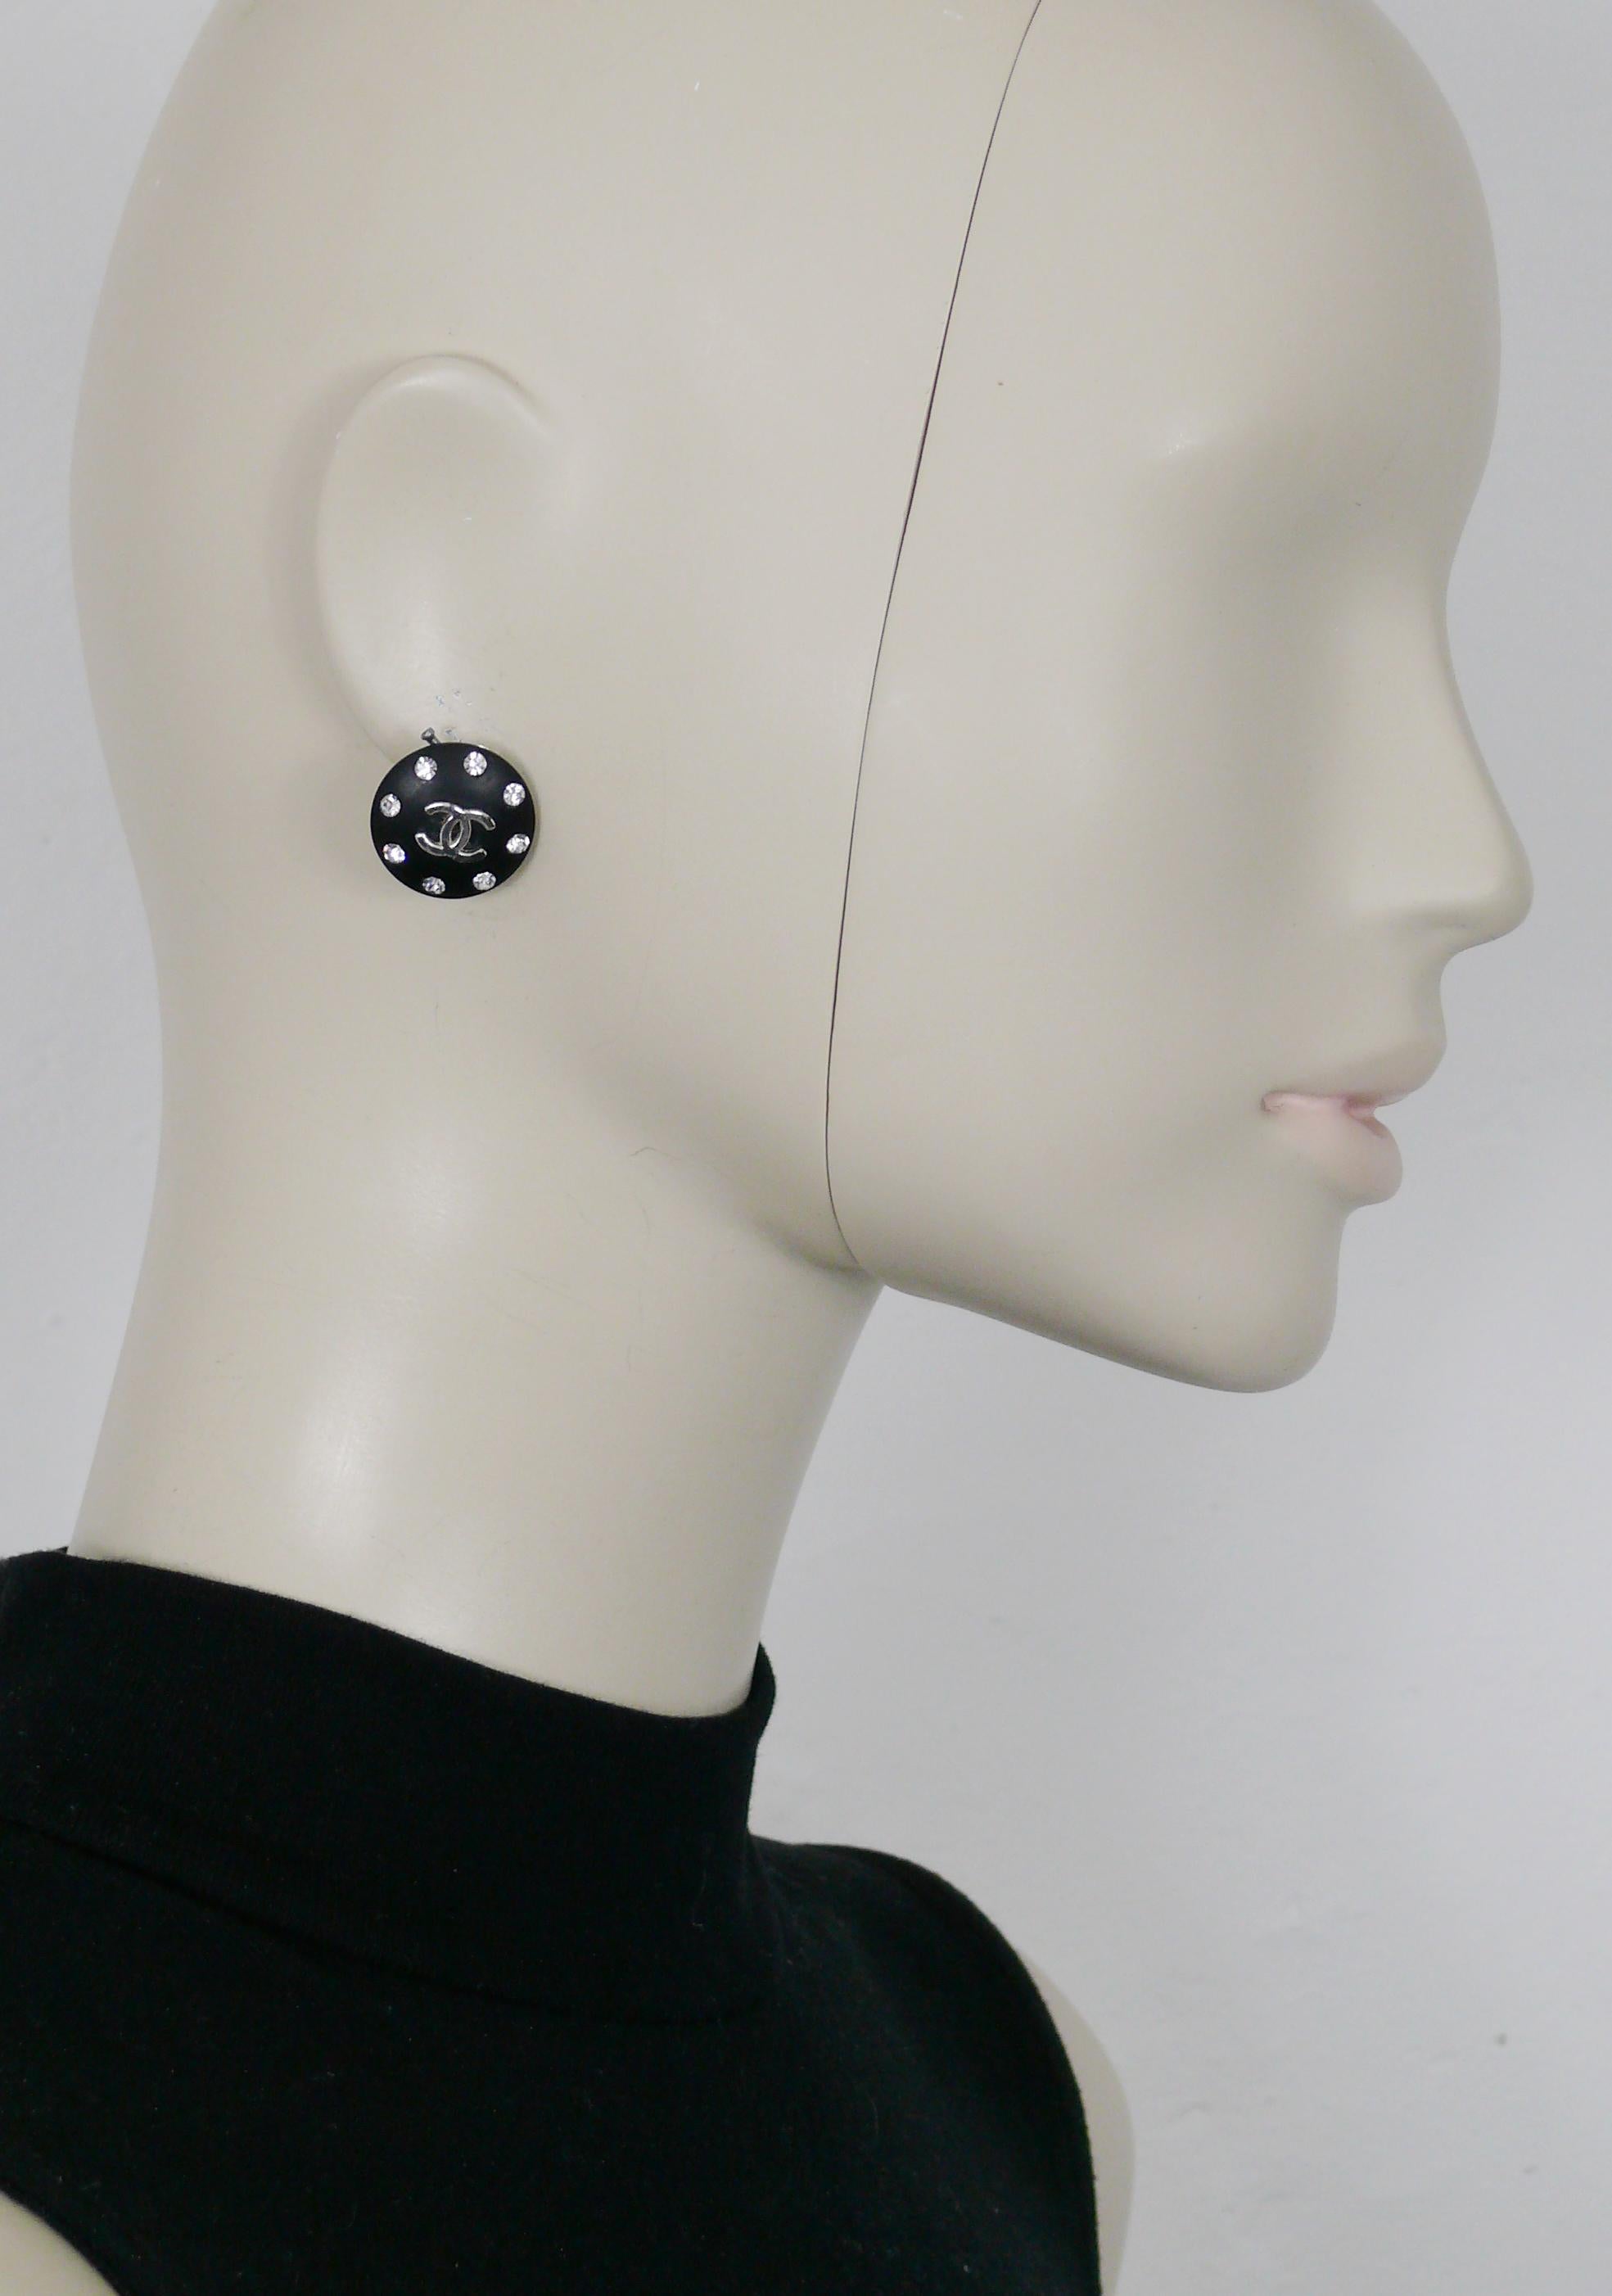 CHANEL vintage 1996 black resin clip on earrings embellished with clear crystals and a silver toned CC logo at the center.

Fall/Winter Collection 1996.

Embossed CHANEL 96 A Made in France.

Indicative measurements : diameter approx. 2 cm (0.79